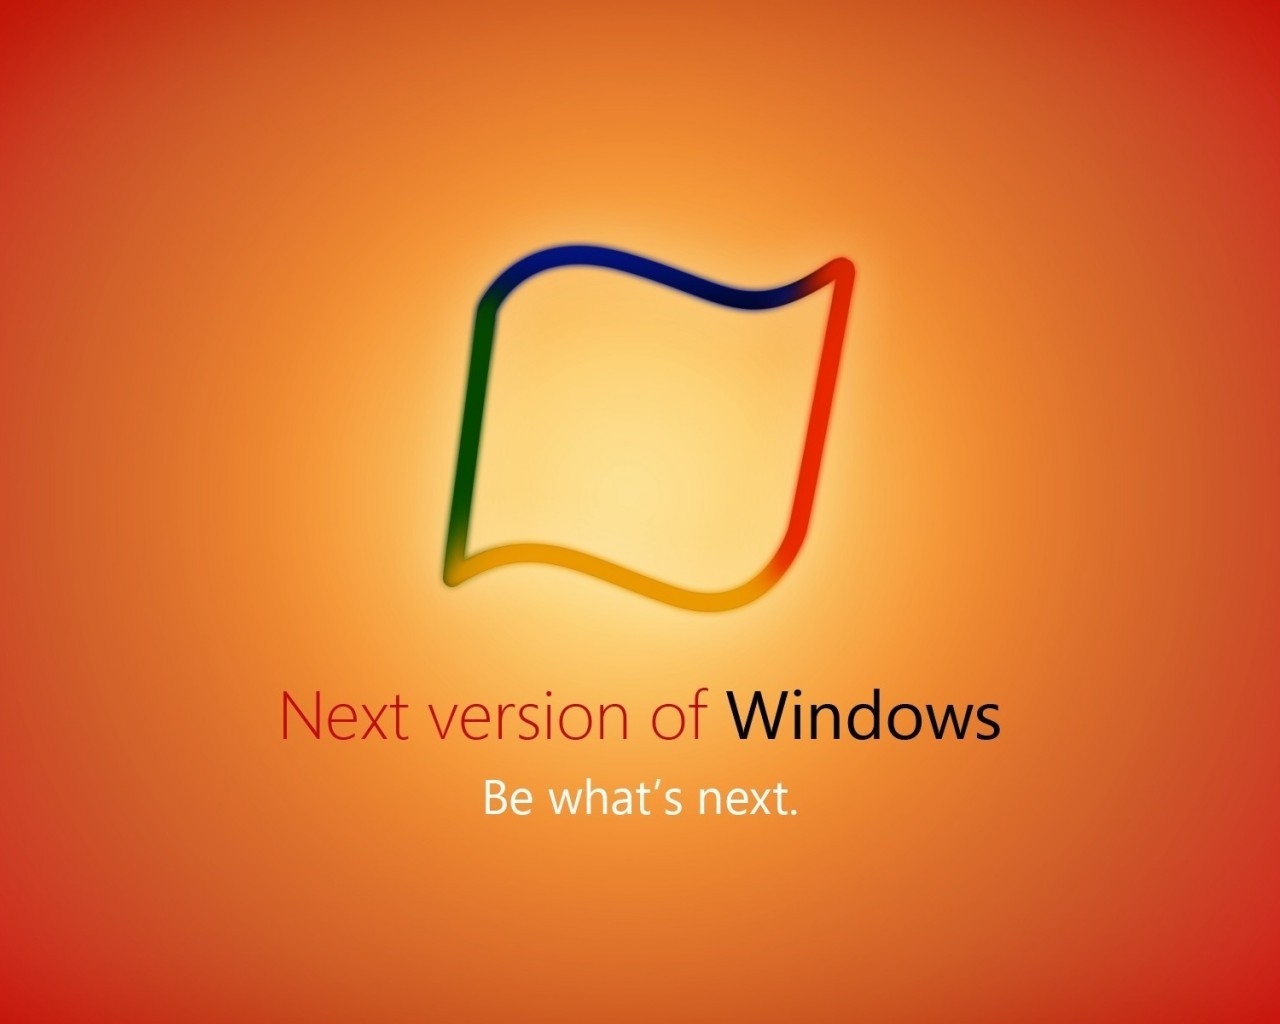 Next Version of Windows for 1280 x 1024 resolution